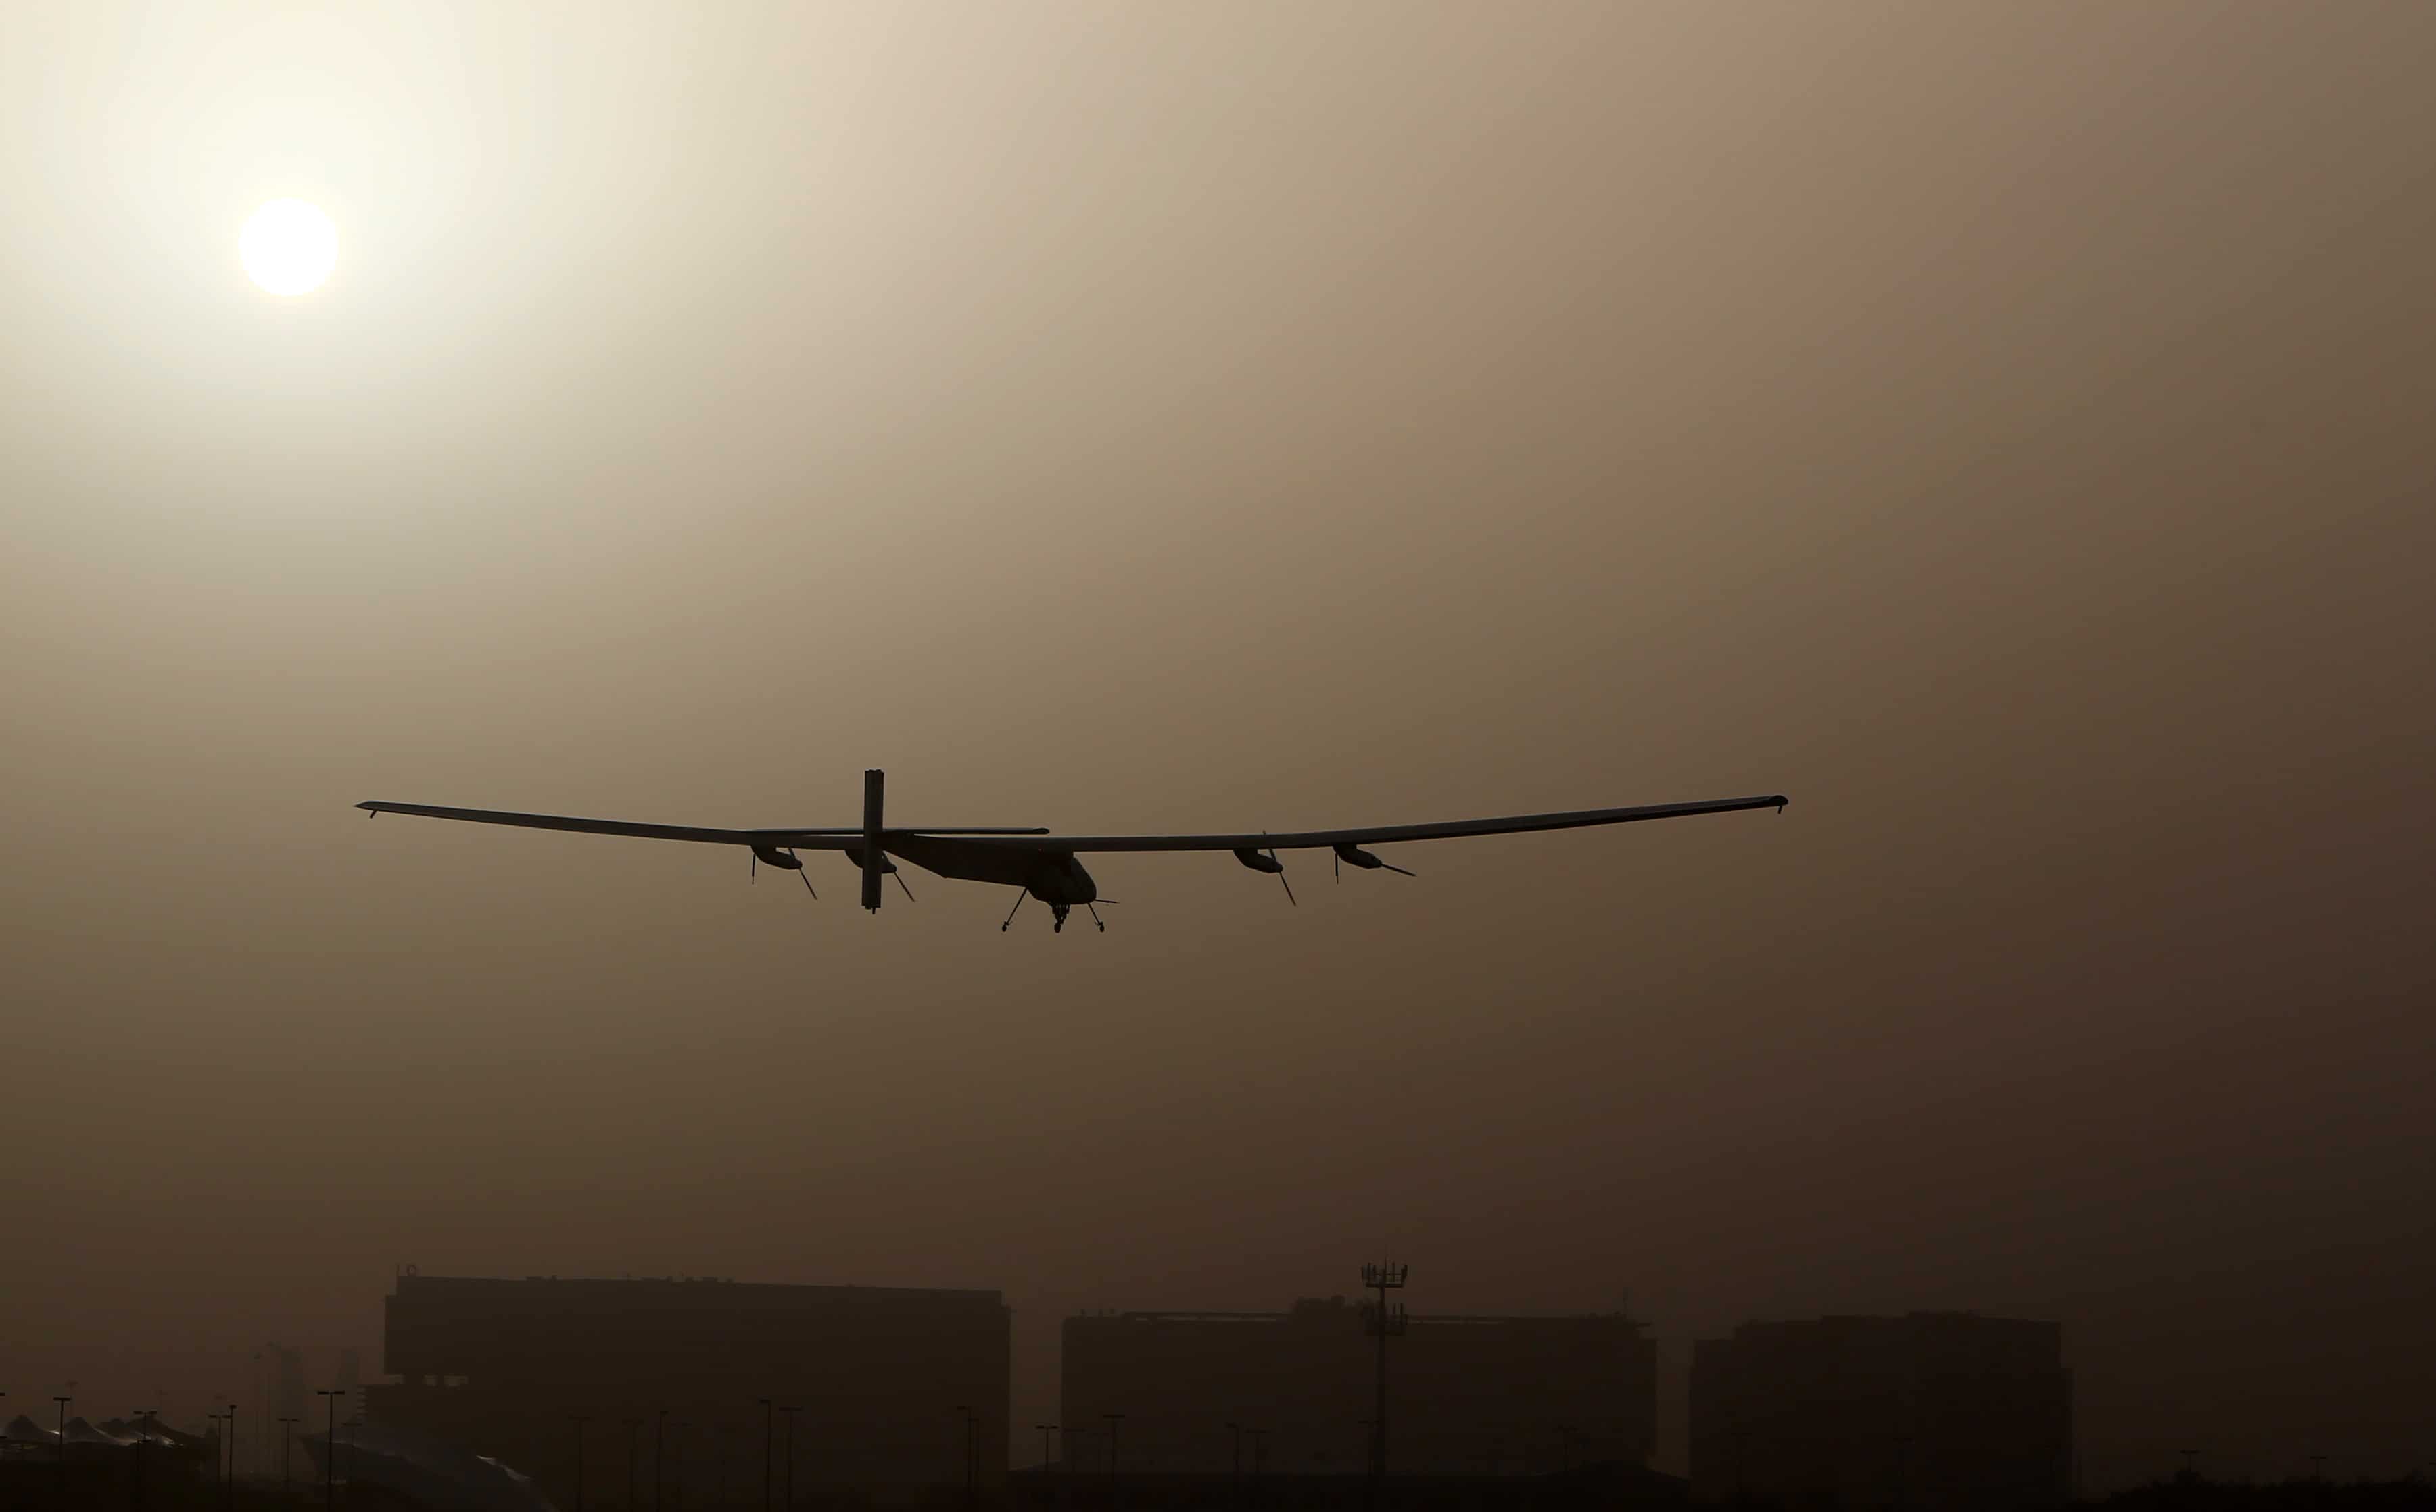 The Solar Impulse 2, takes off from al-Bateen airport in Abu Dhabi as it heads to Muscat, on March 9, 2015, in the first attempt to fly around the world in a plane using solar energy.